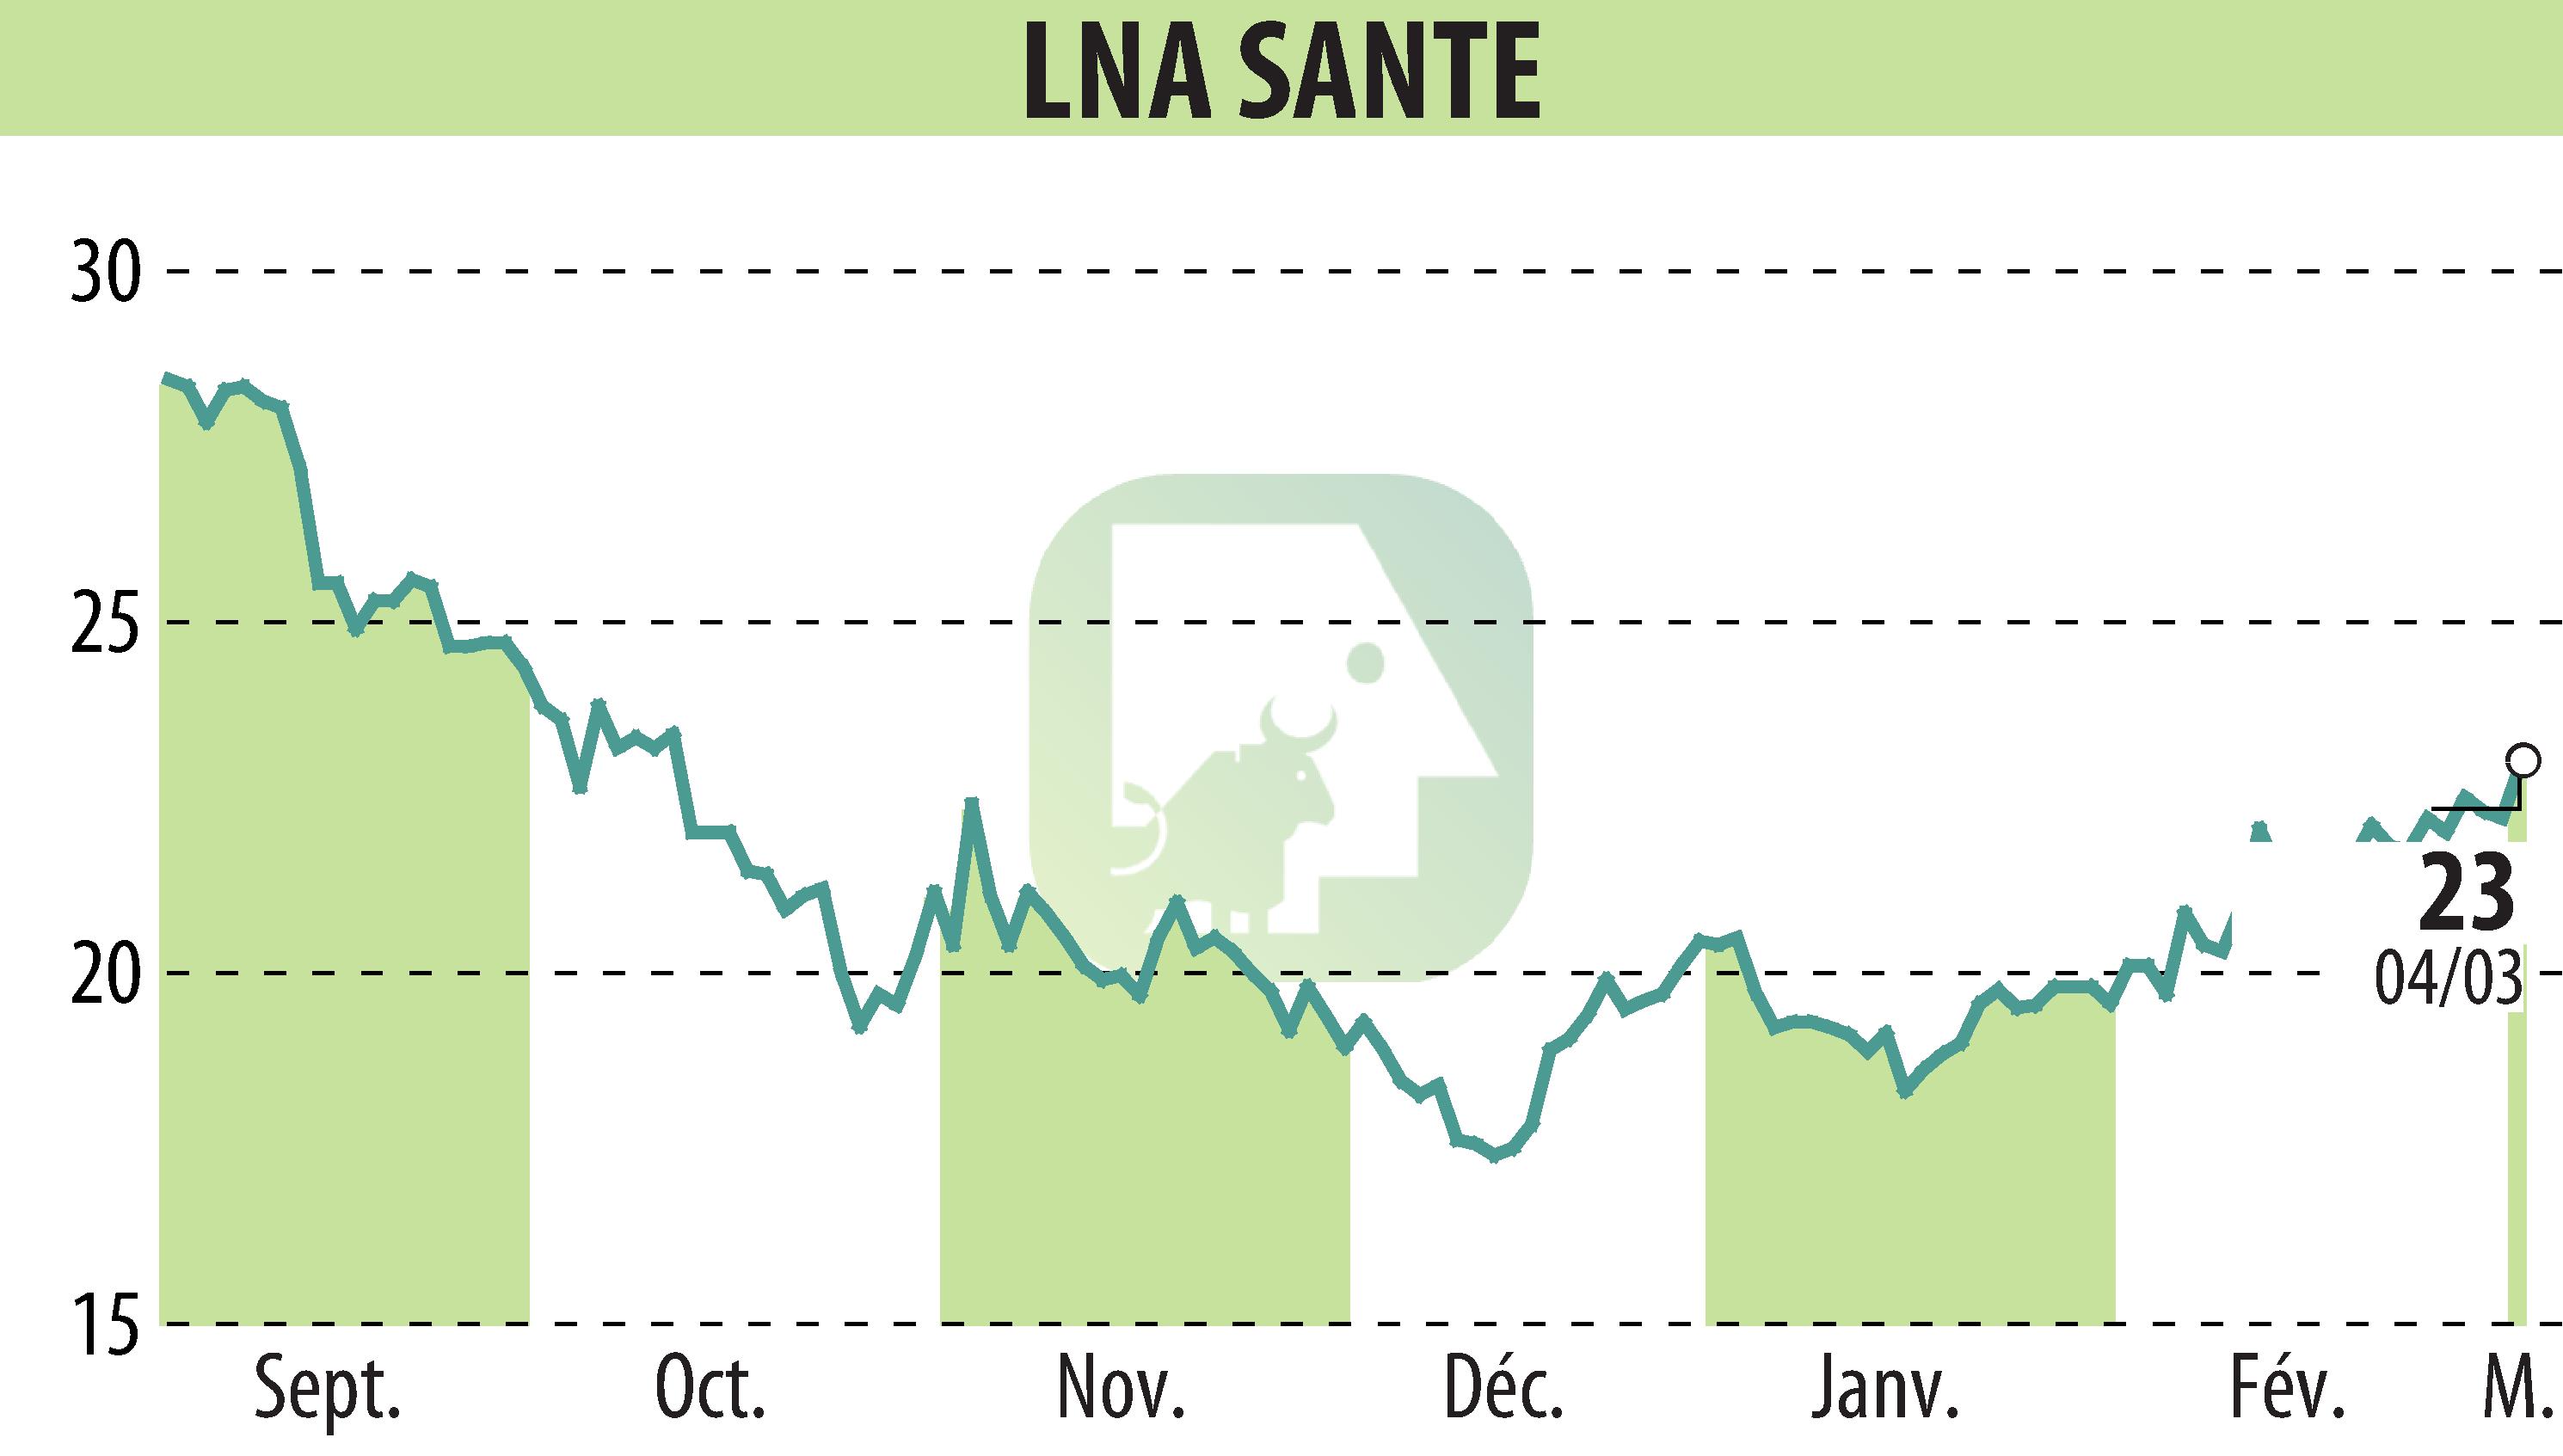 Stock price chart of LNA SANTE (EPA:LNA) showing fluctuations.